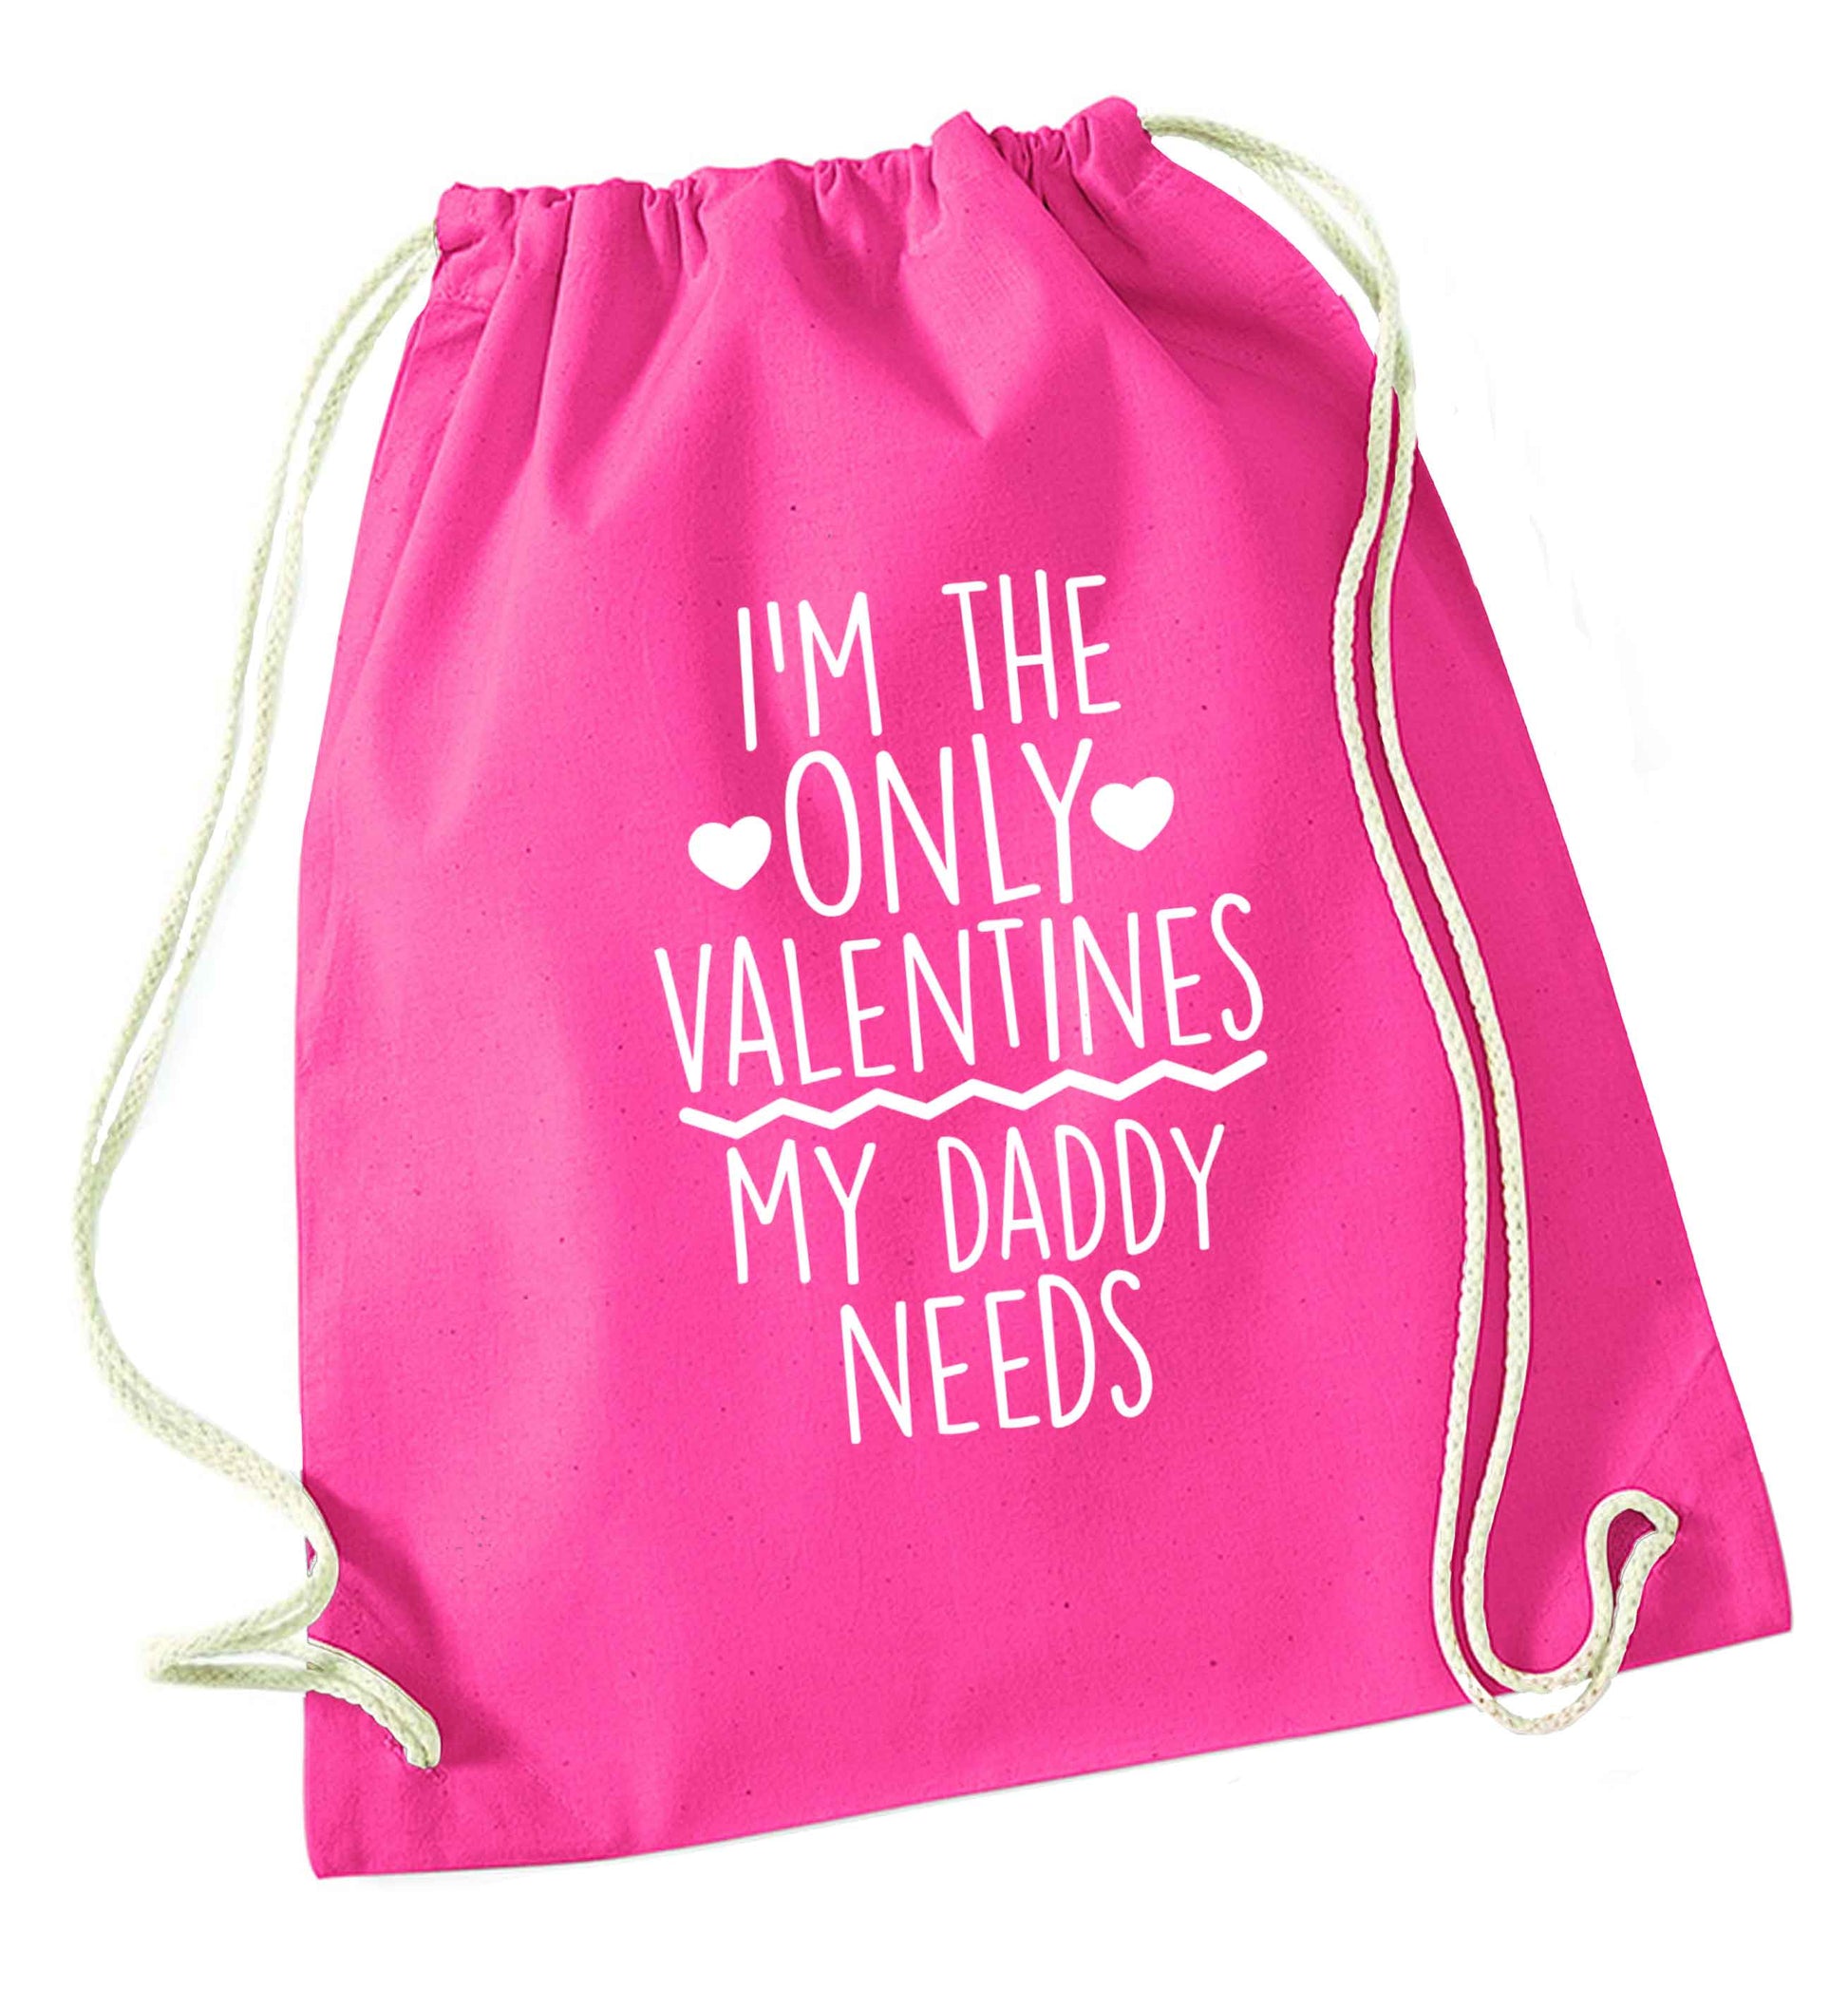 I'm the only valentines my daddy needs pink drawstring bag